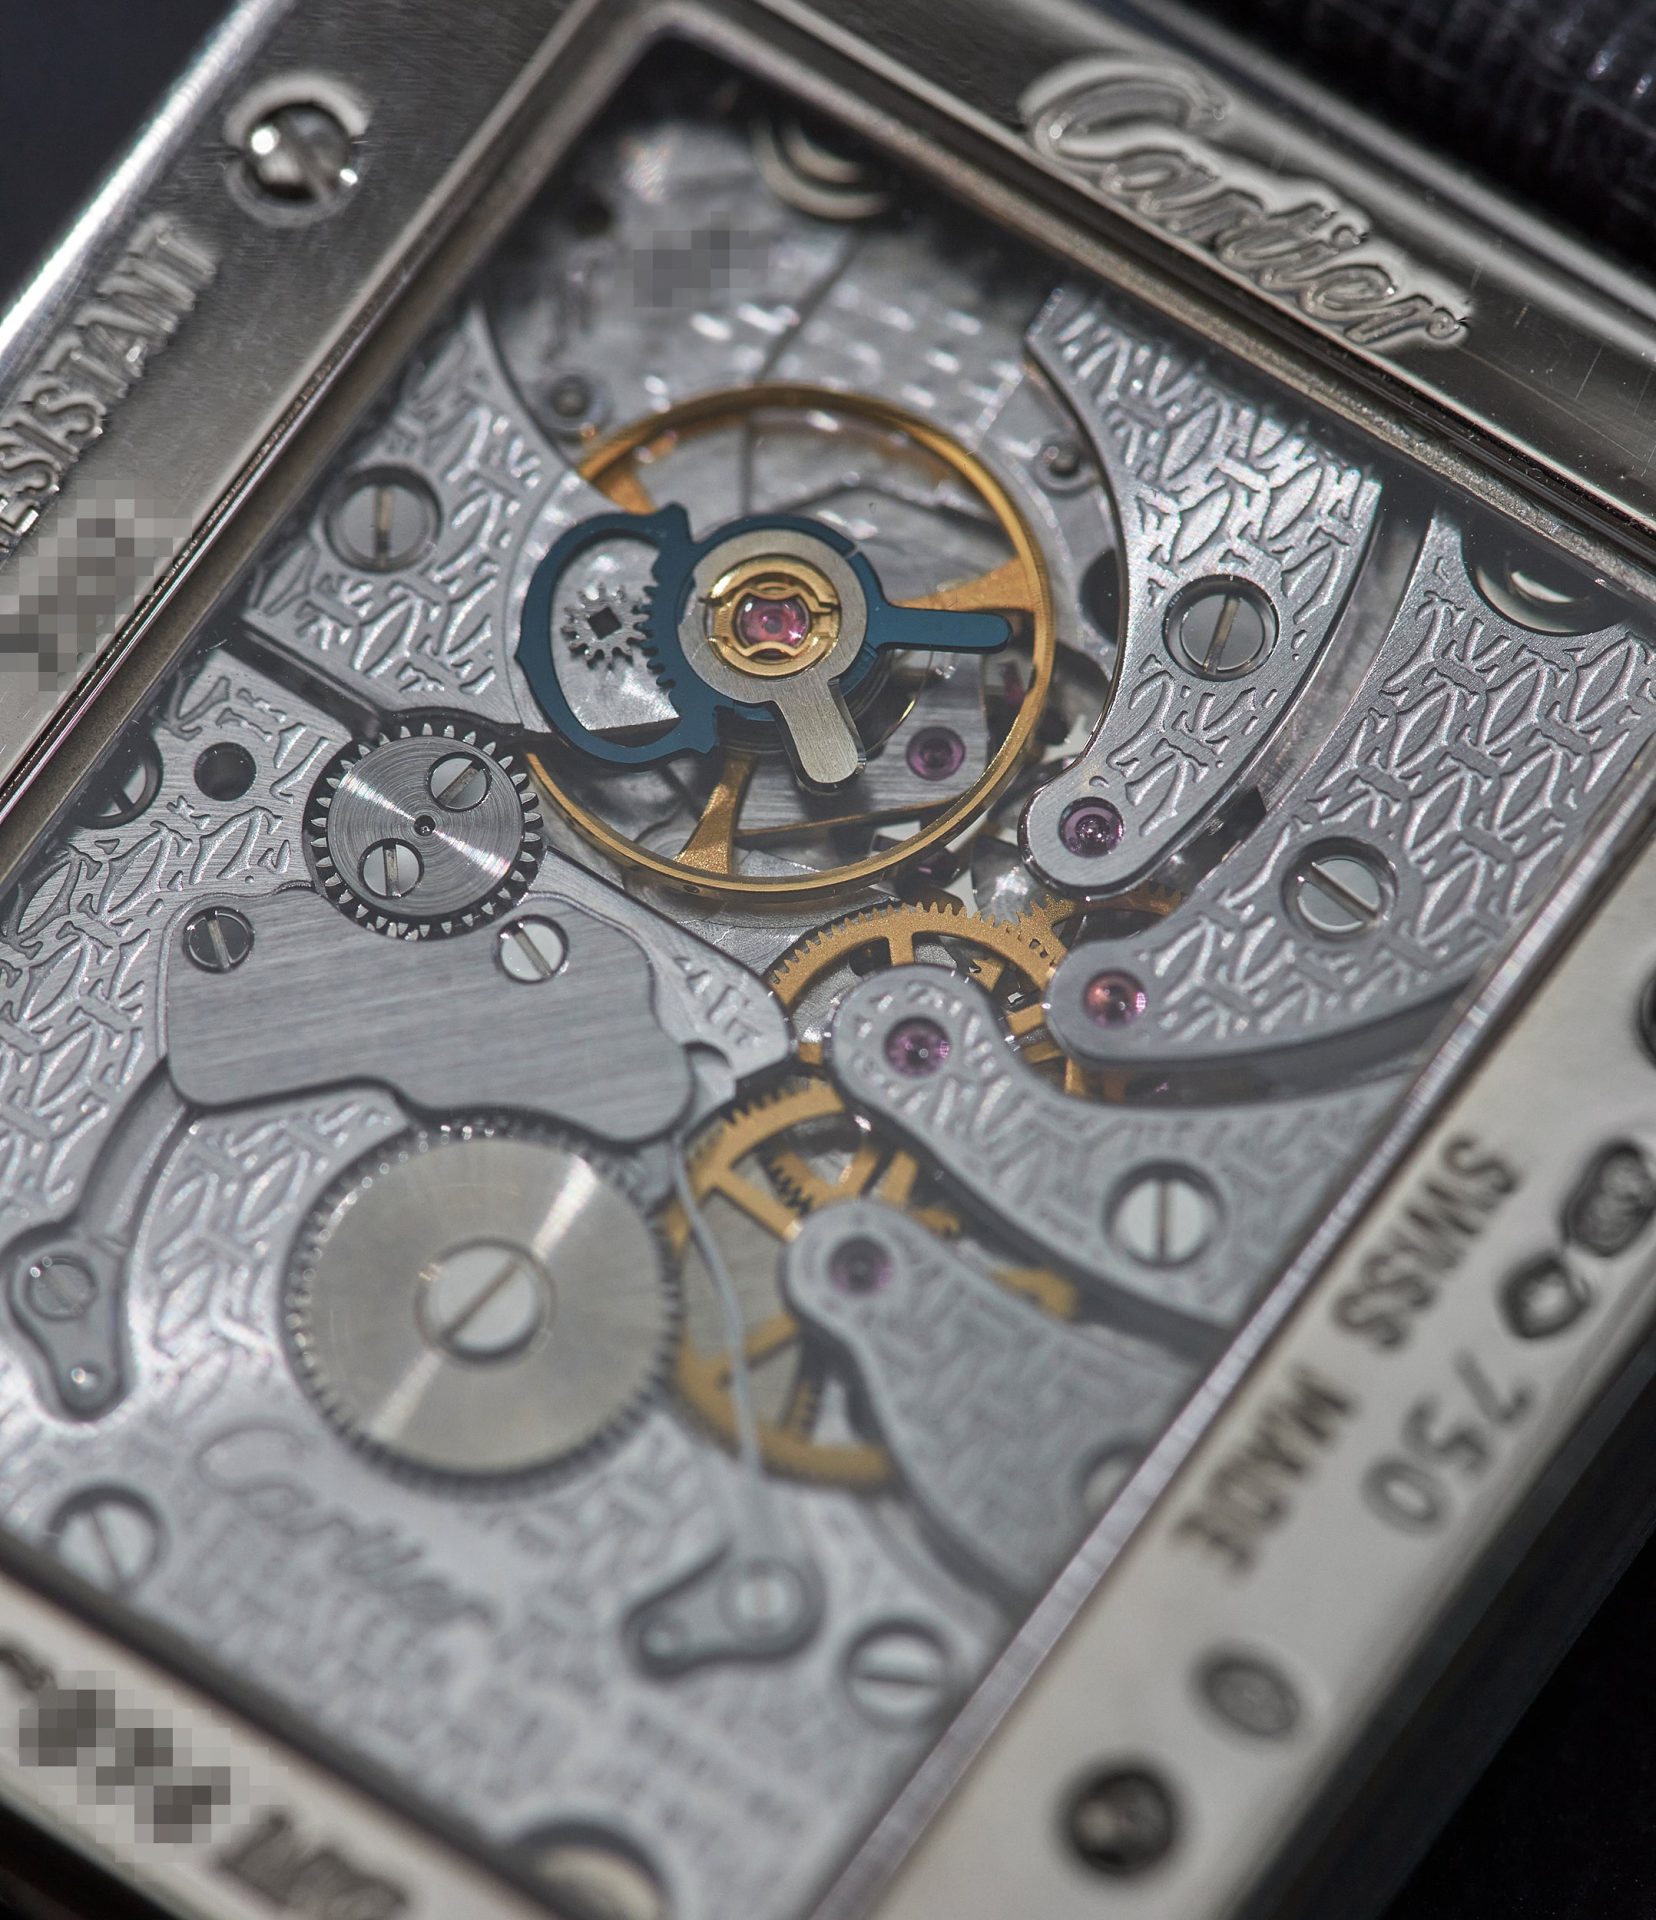 Cartier square watch movement In A Collector’s Guide to the “Collection Privée Cartier Paris” for A Collected Man London